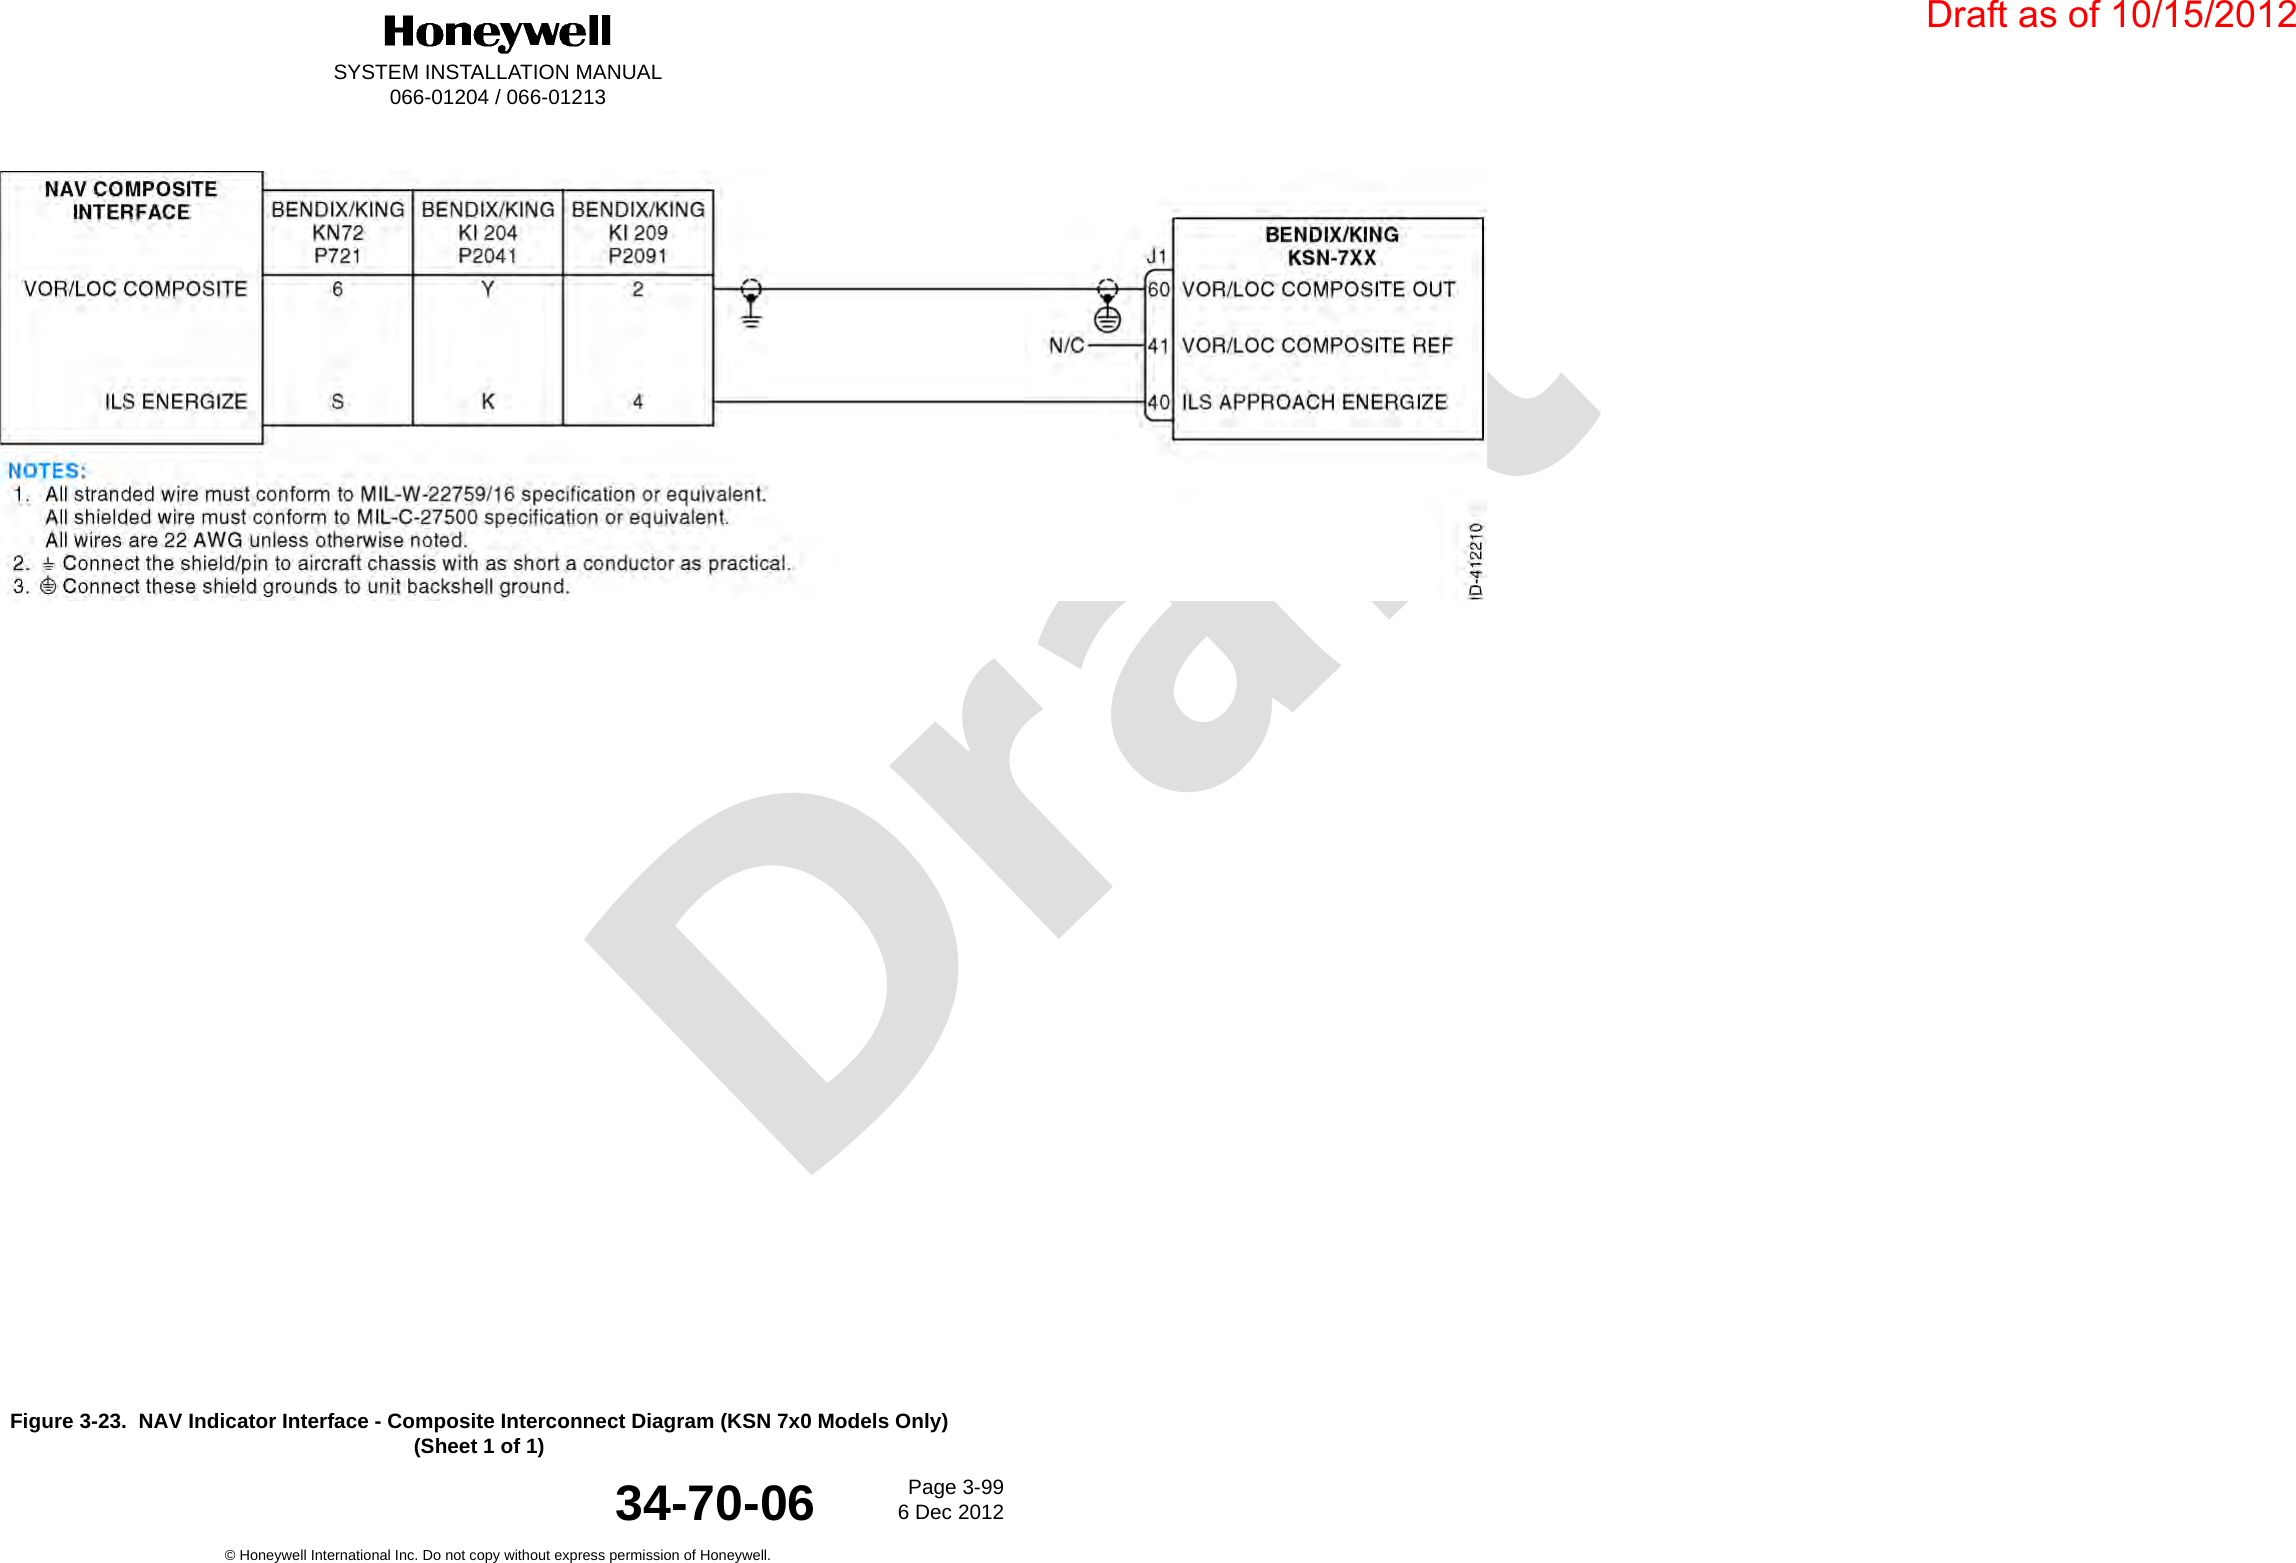 DraftSYSTEM INSTALLATION MANUAL066-01204 / 066-01213Page 3-996 Dec 2012© Honeywell International Inc. Do not copy without express permission of Honeywell.34-70-06Figure 3-23.  NAV Indicator Interface - Composite Interconnect Diagram (KSN 7x0 Models Only) (Sheet 1 of 1)Draft as of 10/15/2012